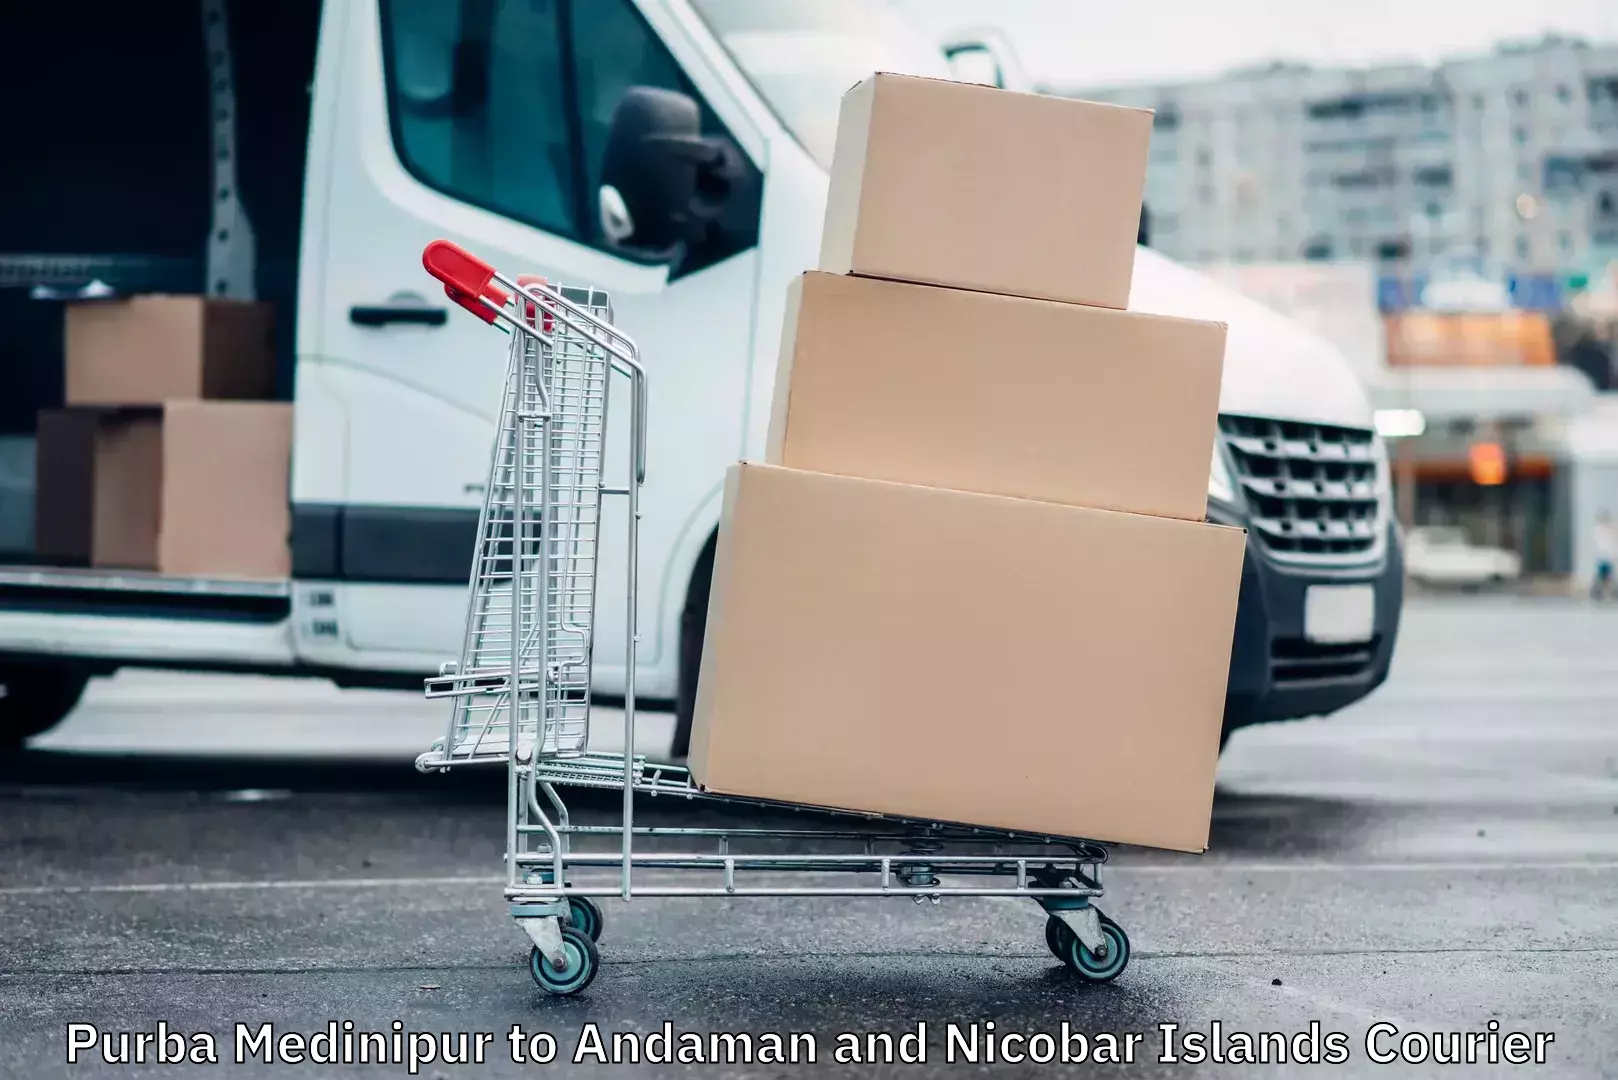 Same-day delivery solutions Purba Medinipur to Andaman and Nicobar Islands